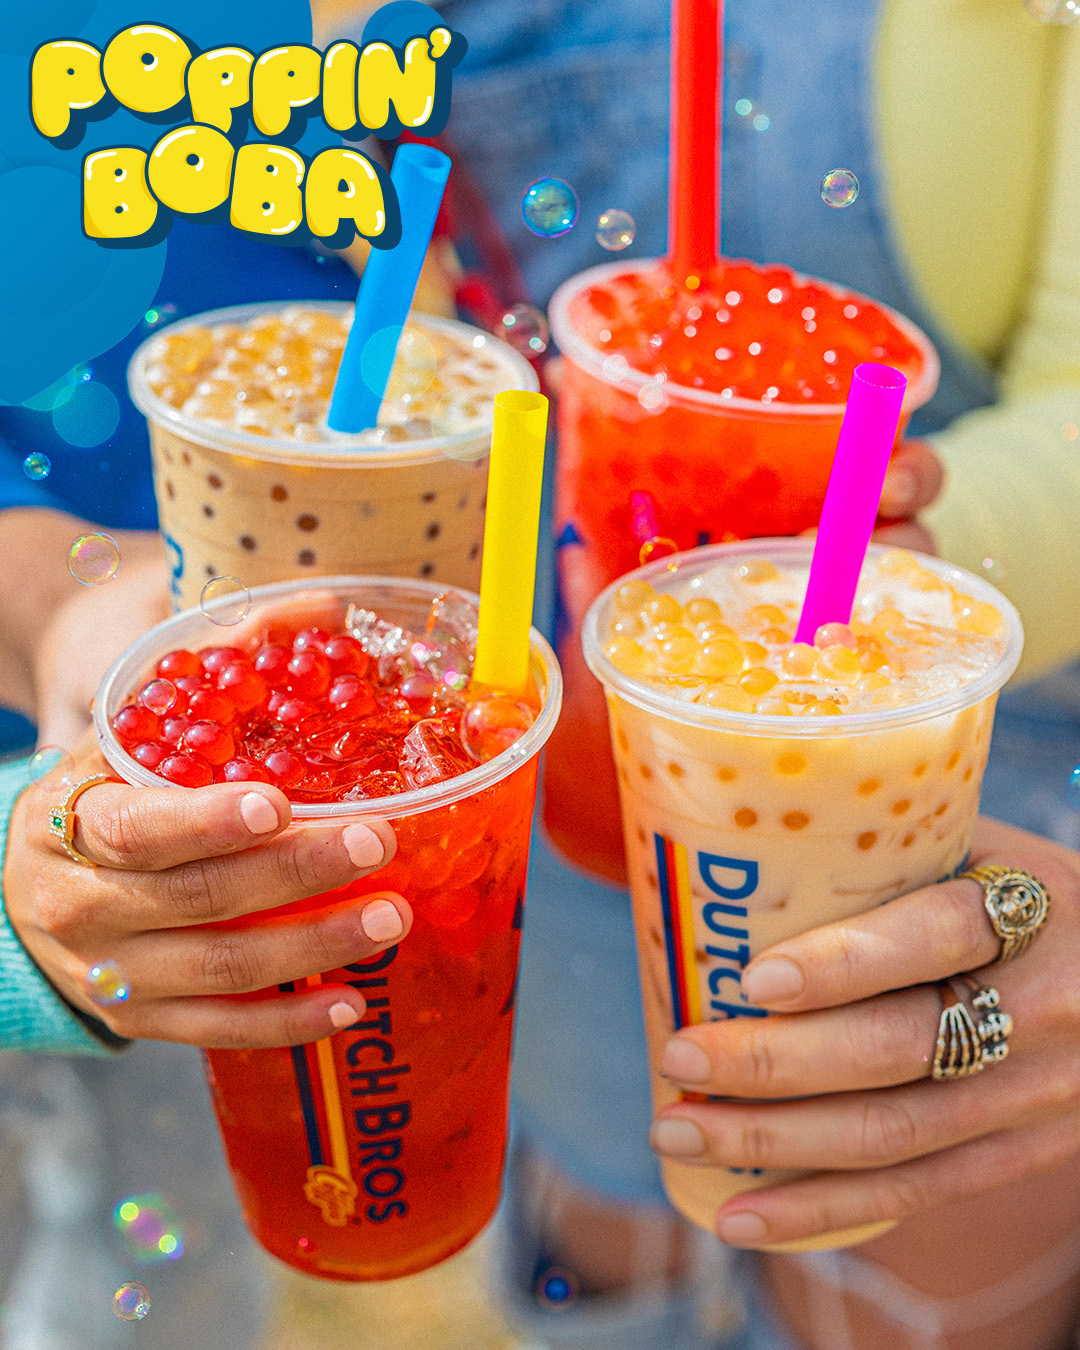 Dutch Bros adds a pop of flavor with new Poppin’ Boba